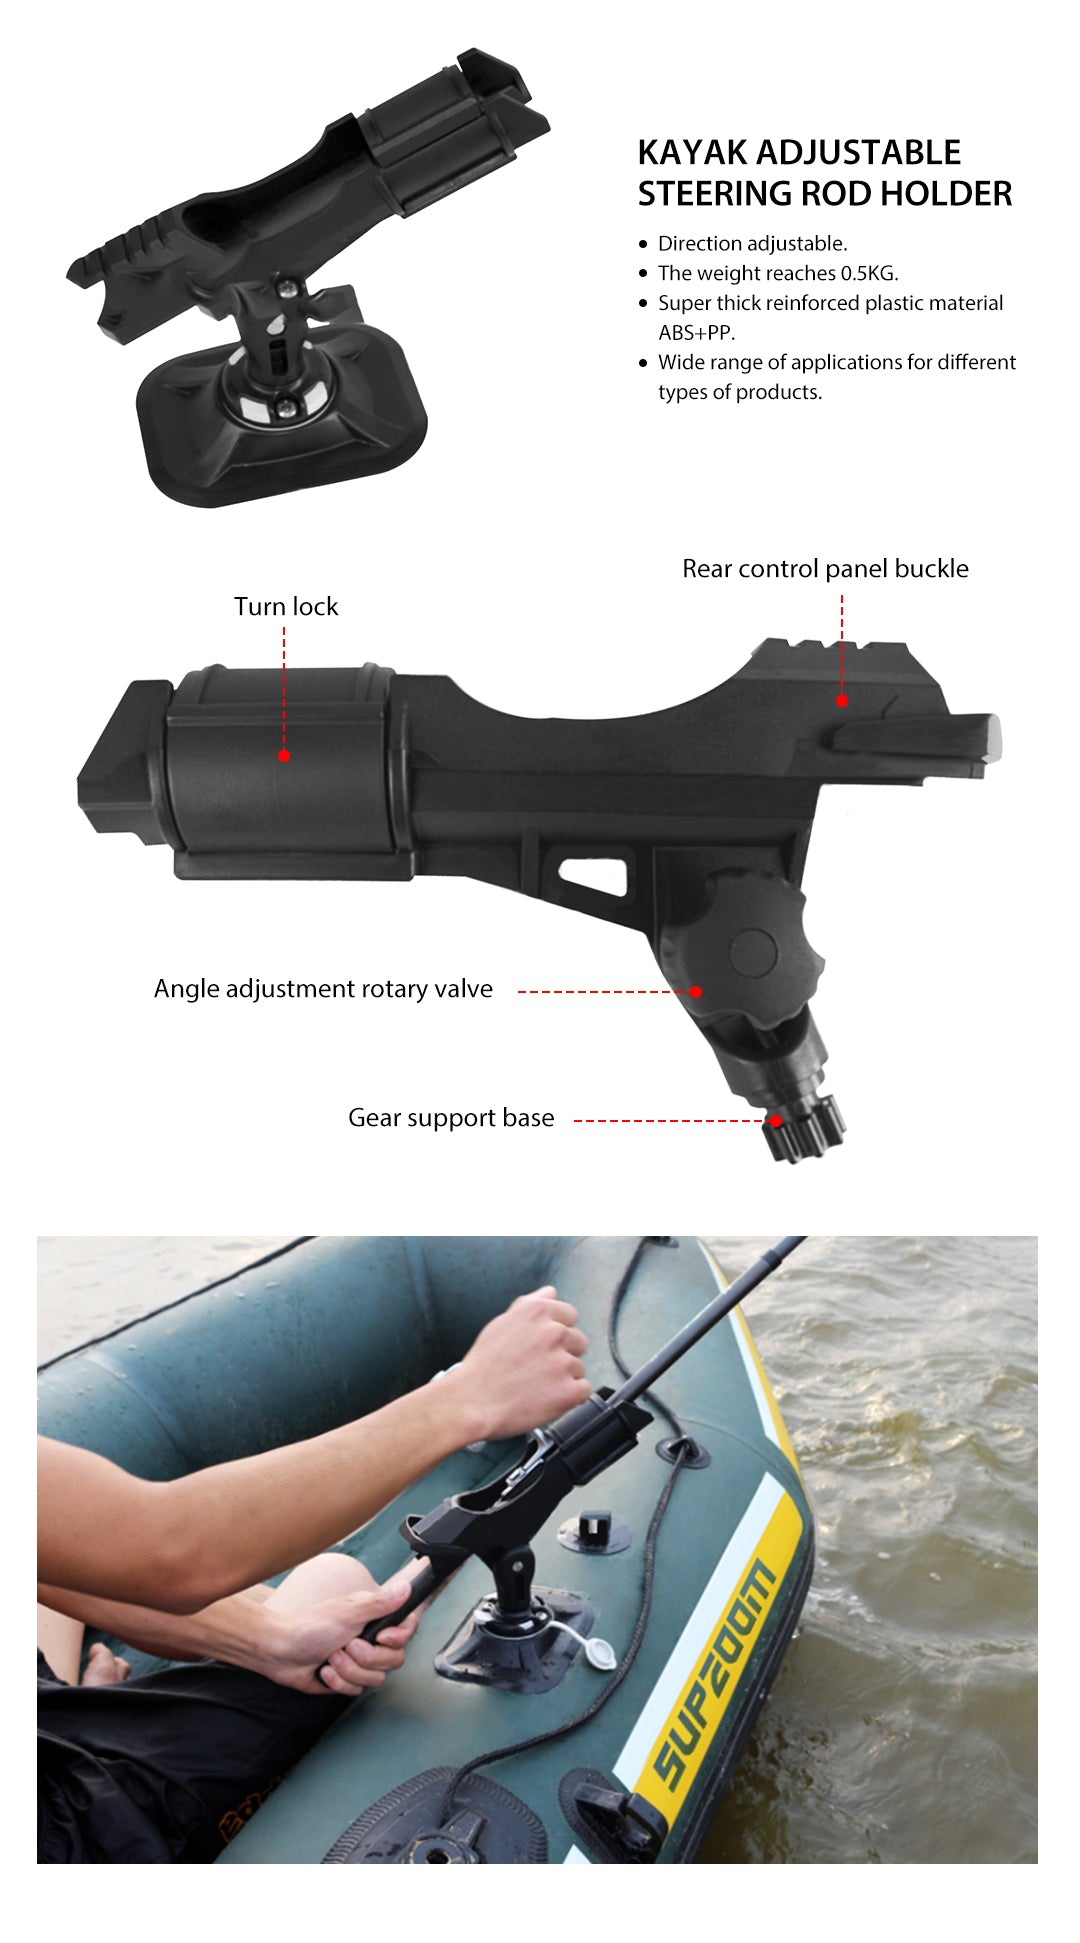 Adjustable Steering Rod Holder For Inflatable Paddle Board and Kayak